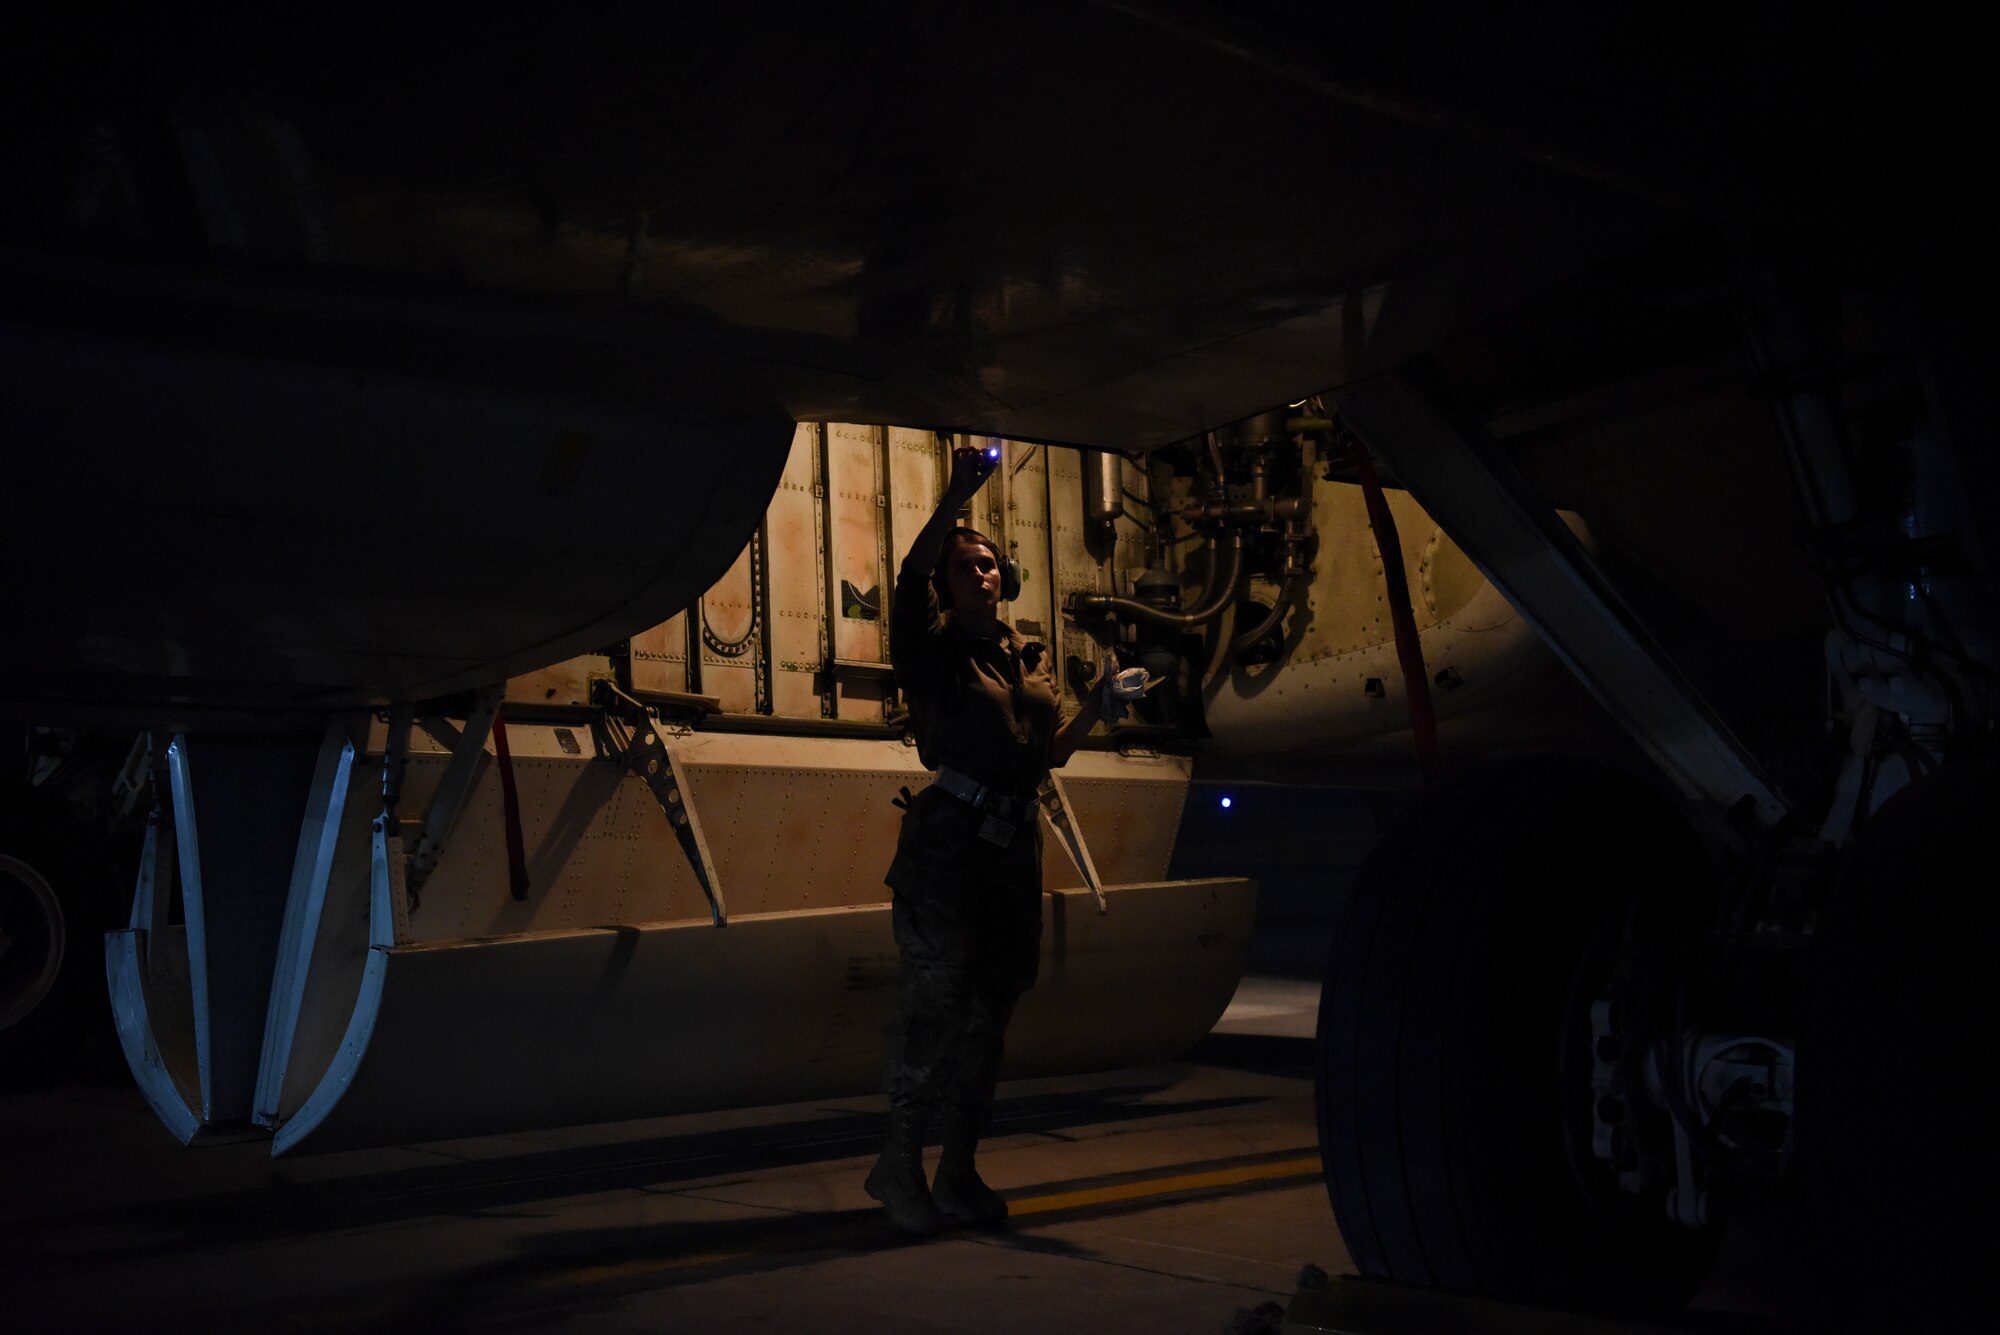 Senior Airman Larissa Locke, 380th Expeditionary Aircraft Maintenance Squadron hydraulics systems specialist, inspects the compartments of an E-3 Sentry after landing at Al Dhafra Air Base, United Arab Emirates, Mar. 7, 2019.